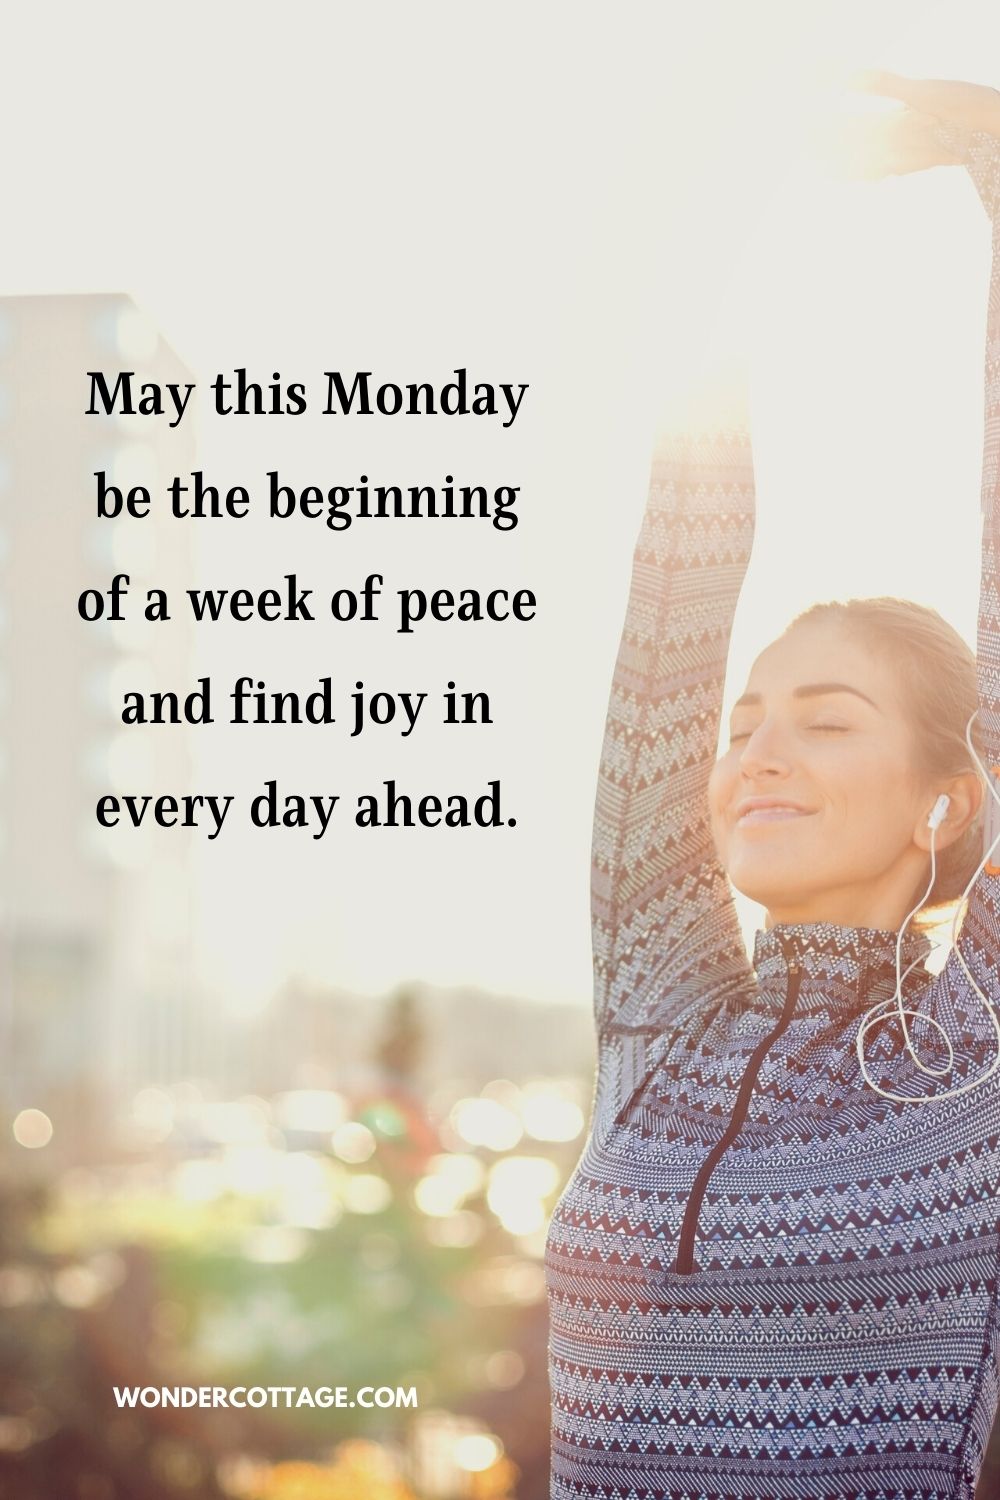 May this Monday be the beginning of a week of peace and find joy in every day ahead.